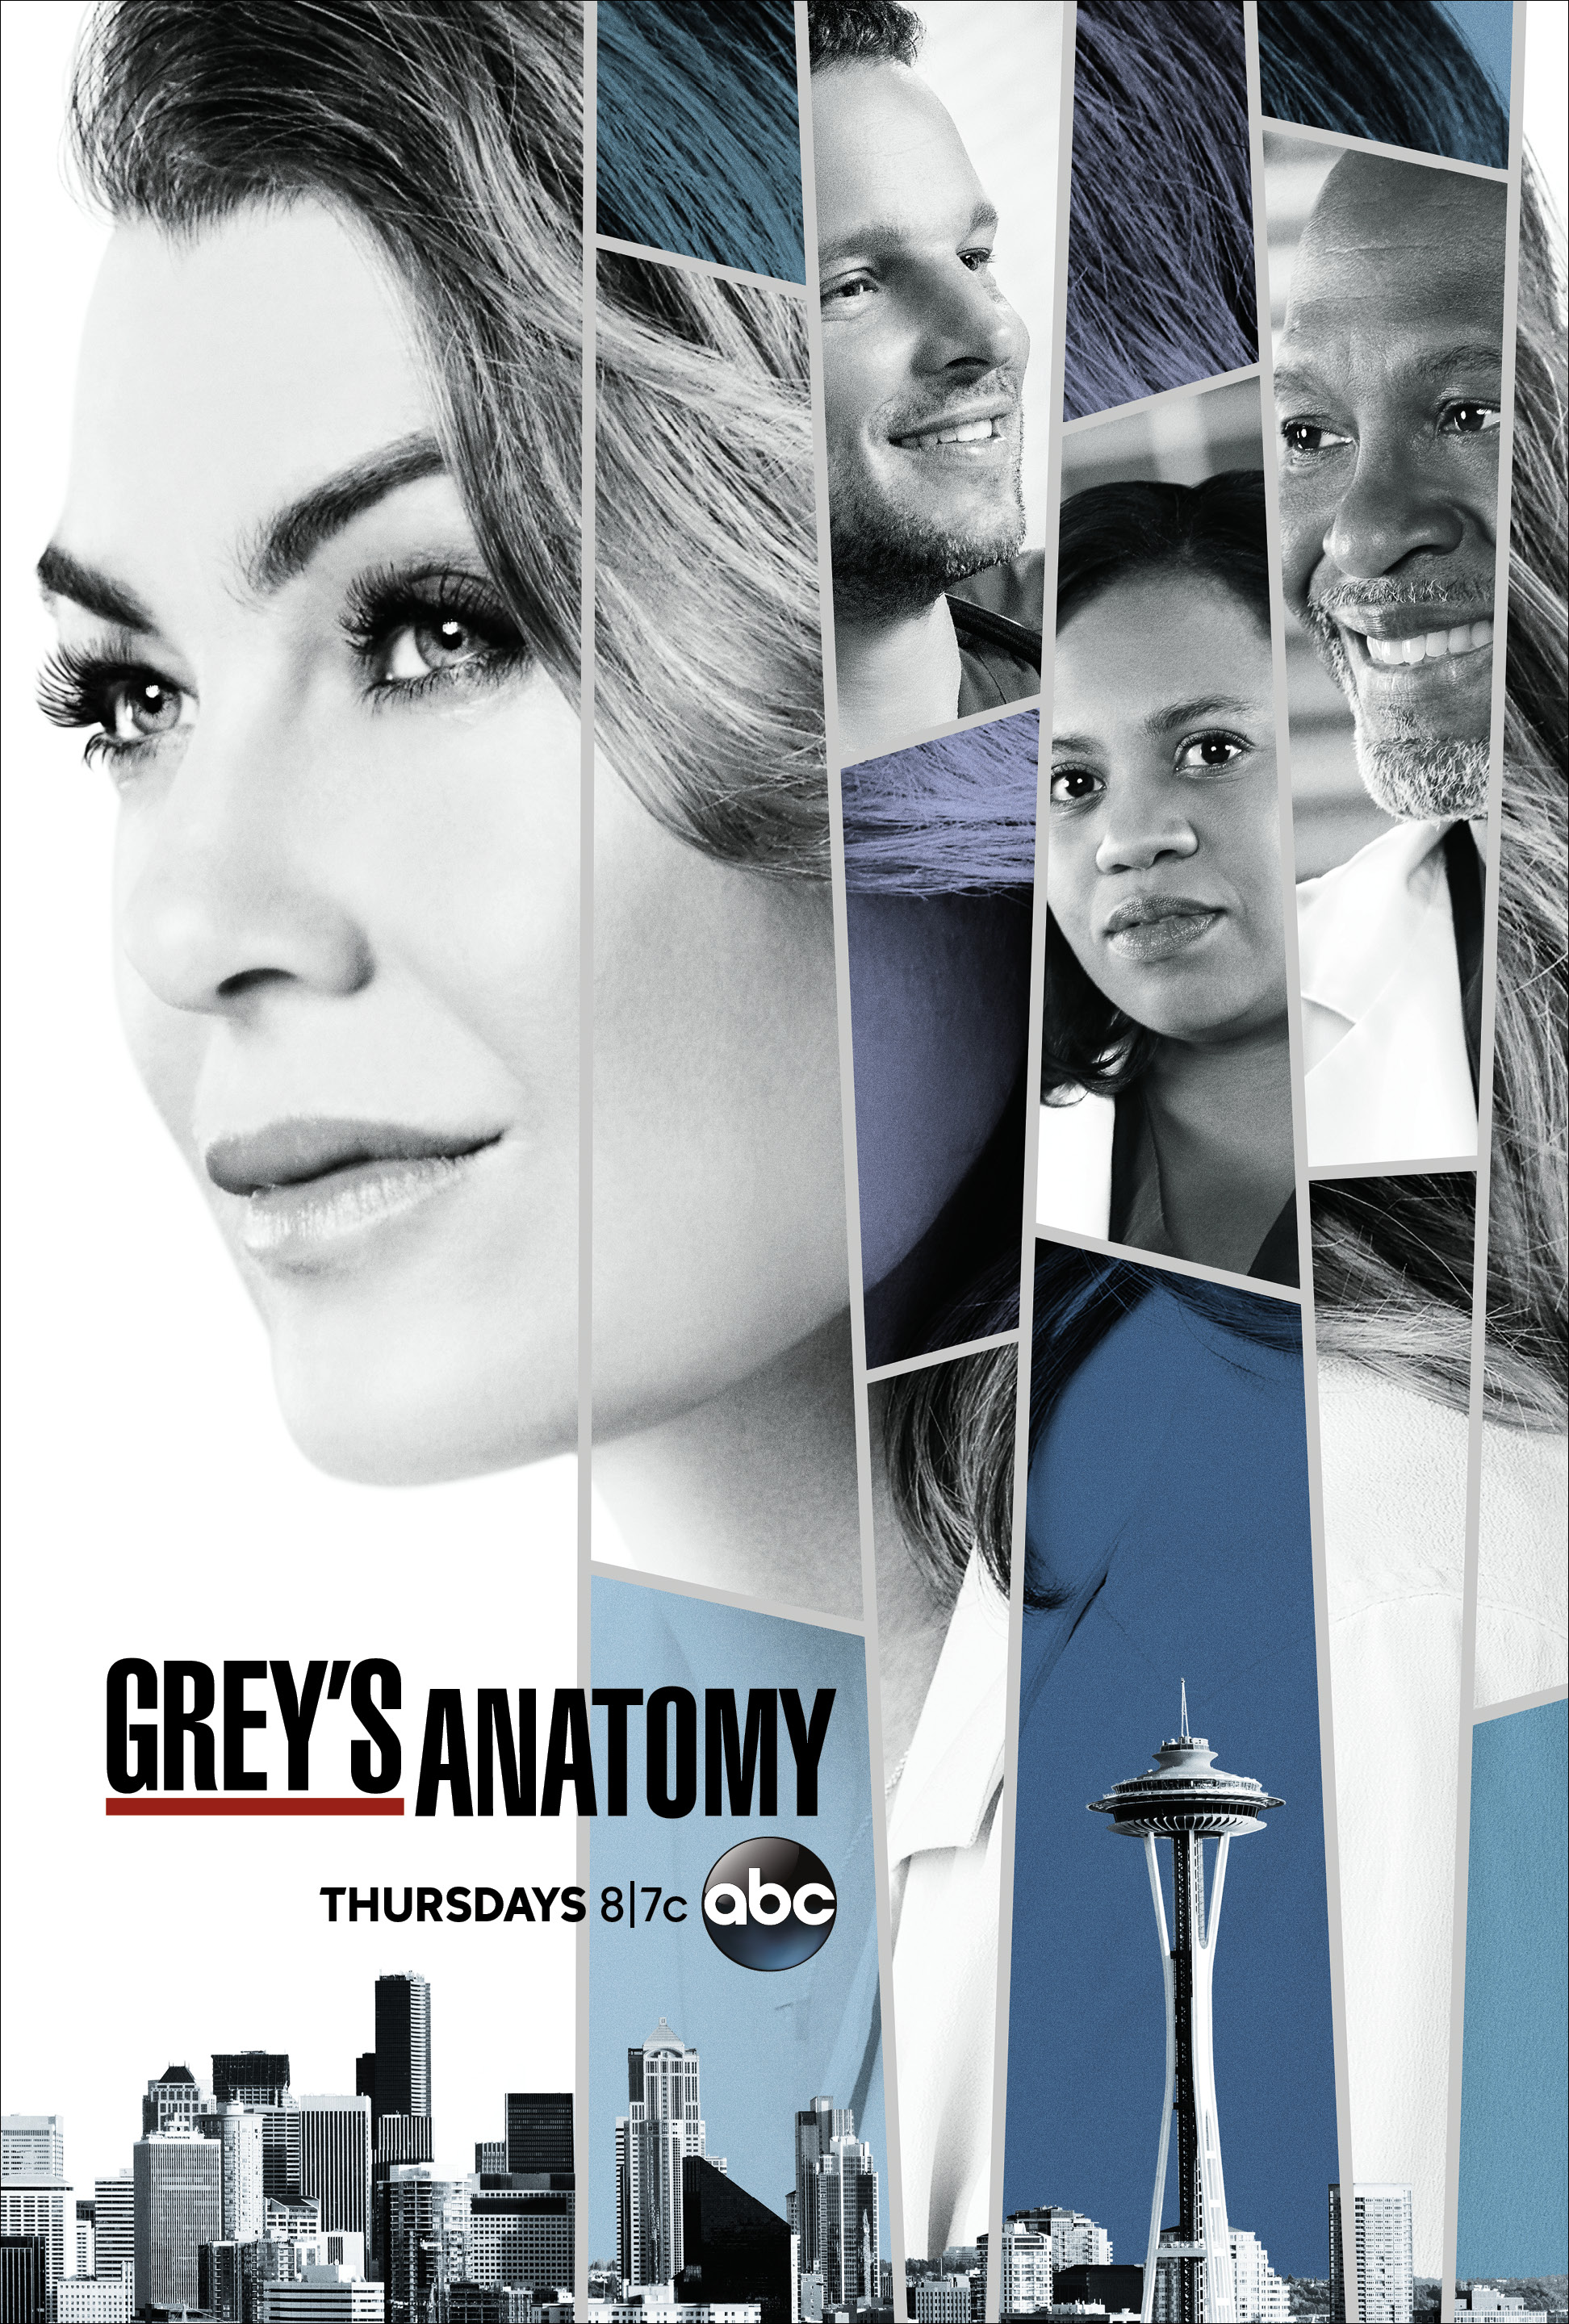 Grey’s Anatomy climbs to No. 1 in Top Scripted